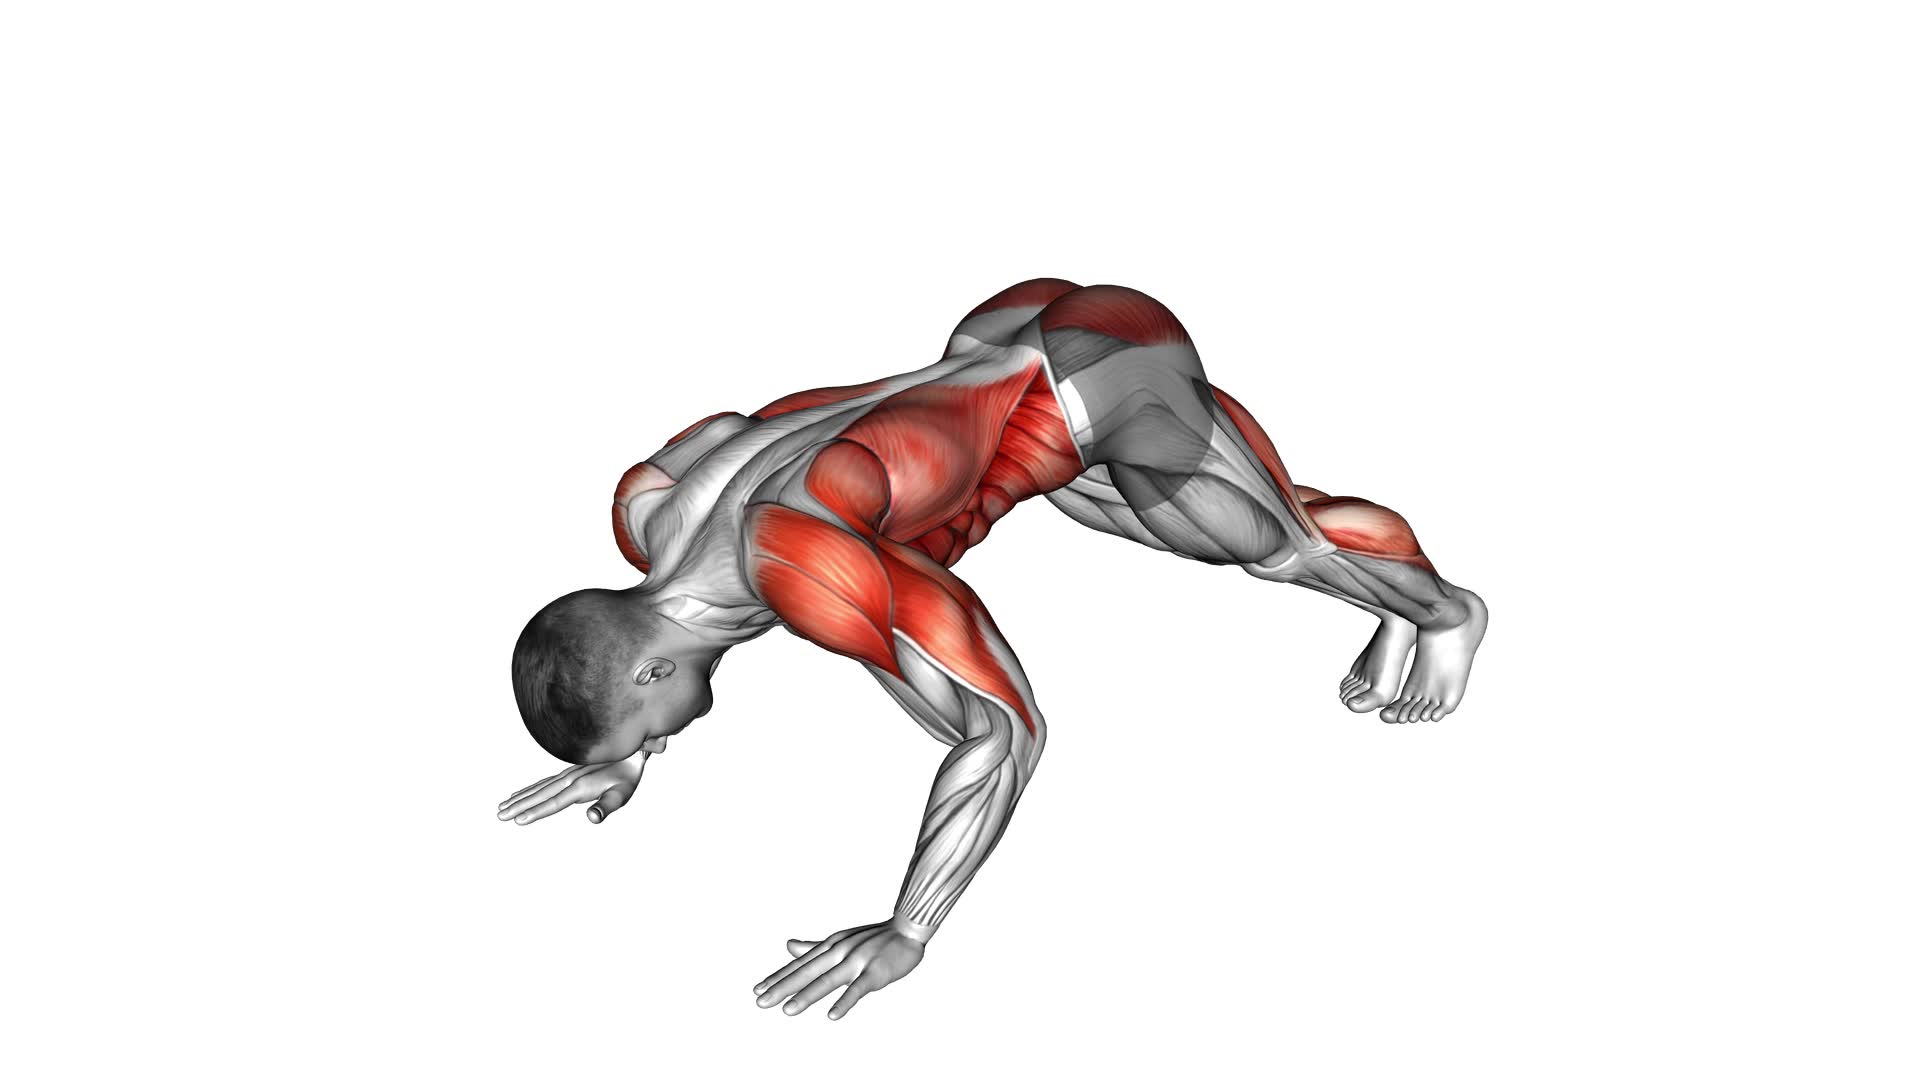 Modified Hindu Push-up (male) - Video Exercise Guide & Tips